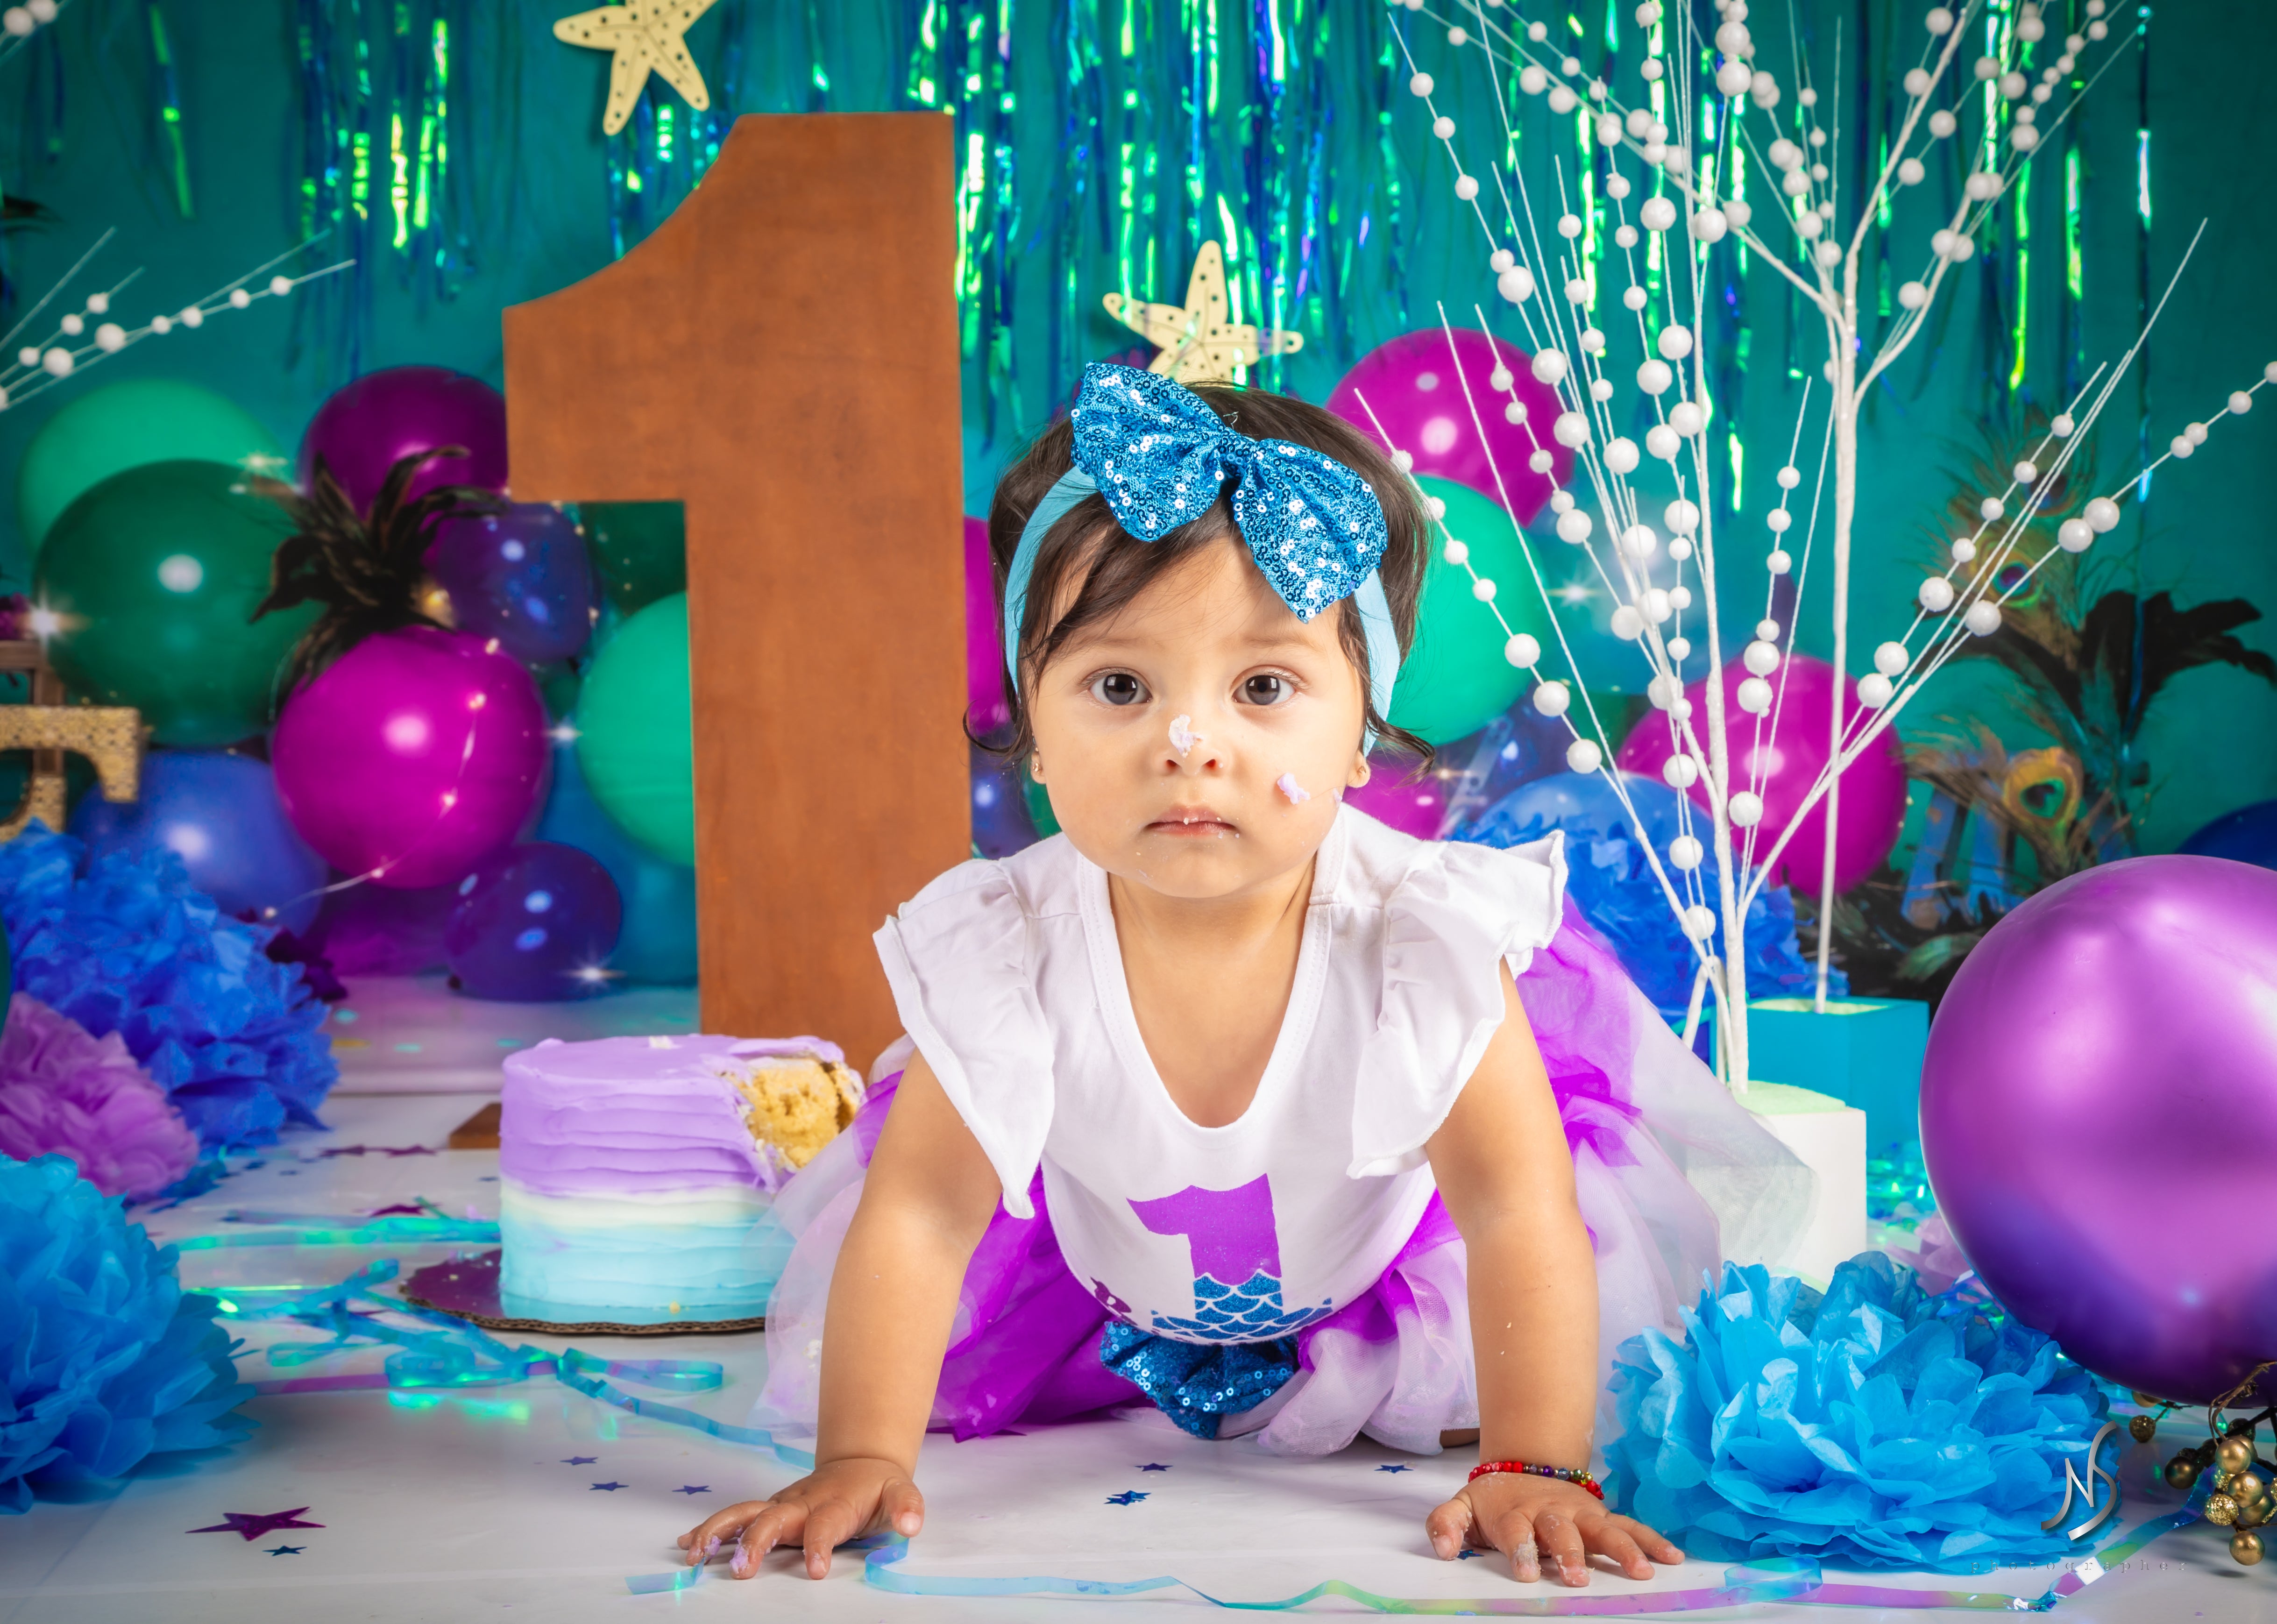 Kate 1st Birthday with Balloons Backdrop for Photography Designed by Cassie Christiansen Photography